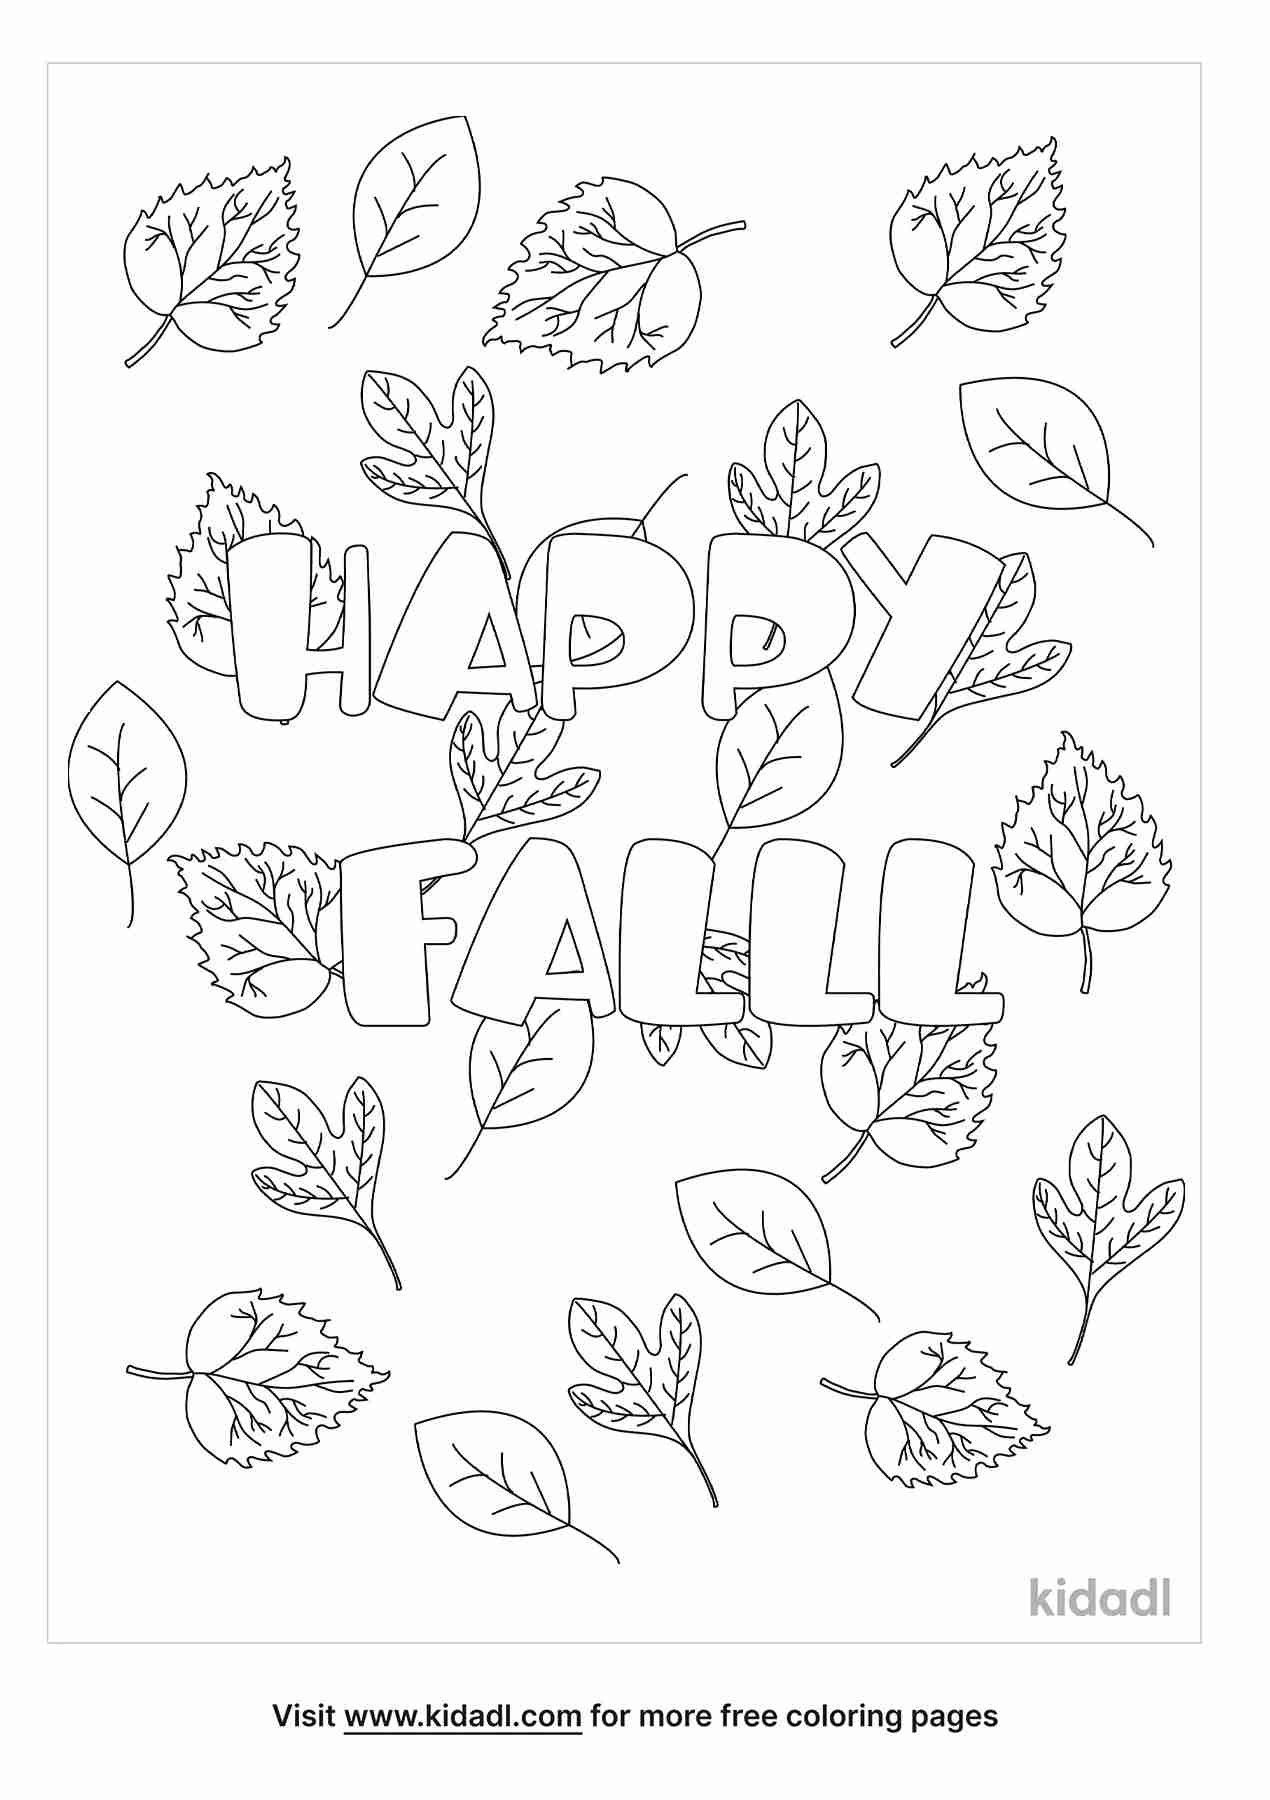 Happy falll coloring pages for kids.